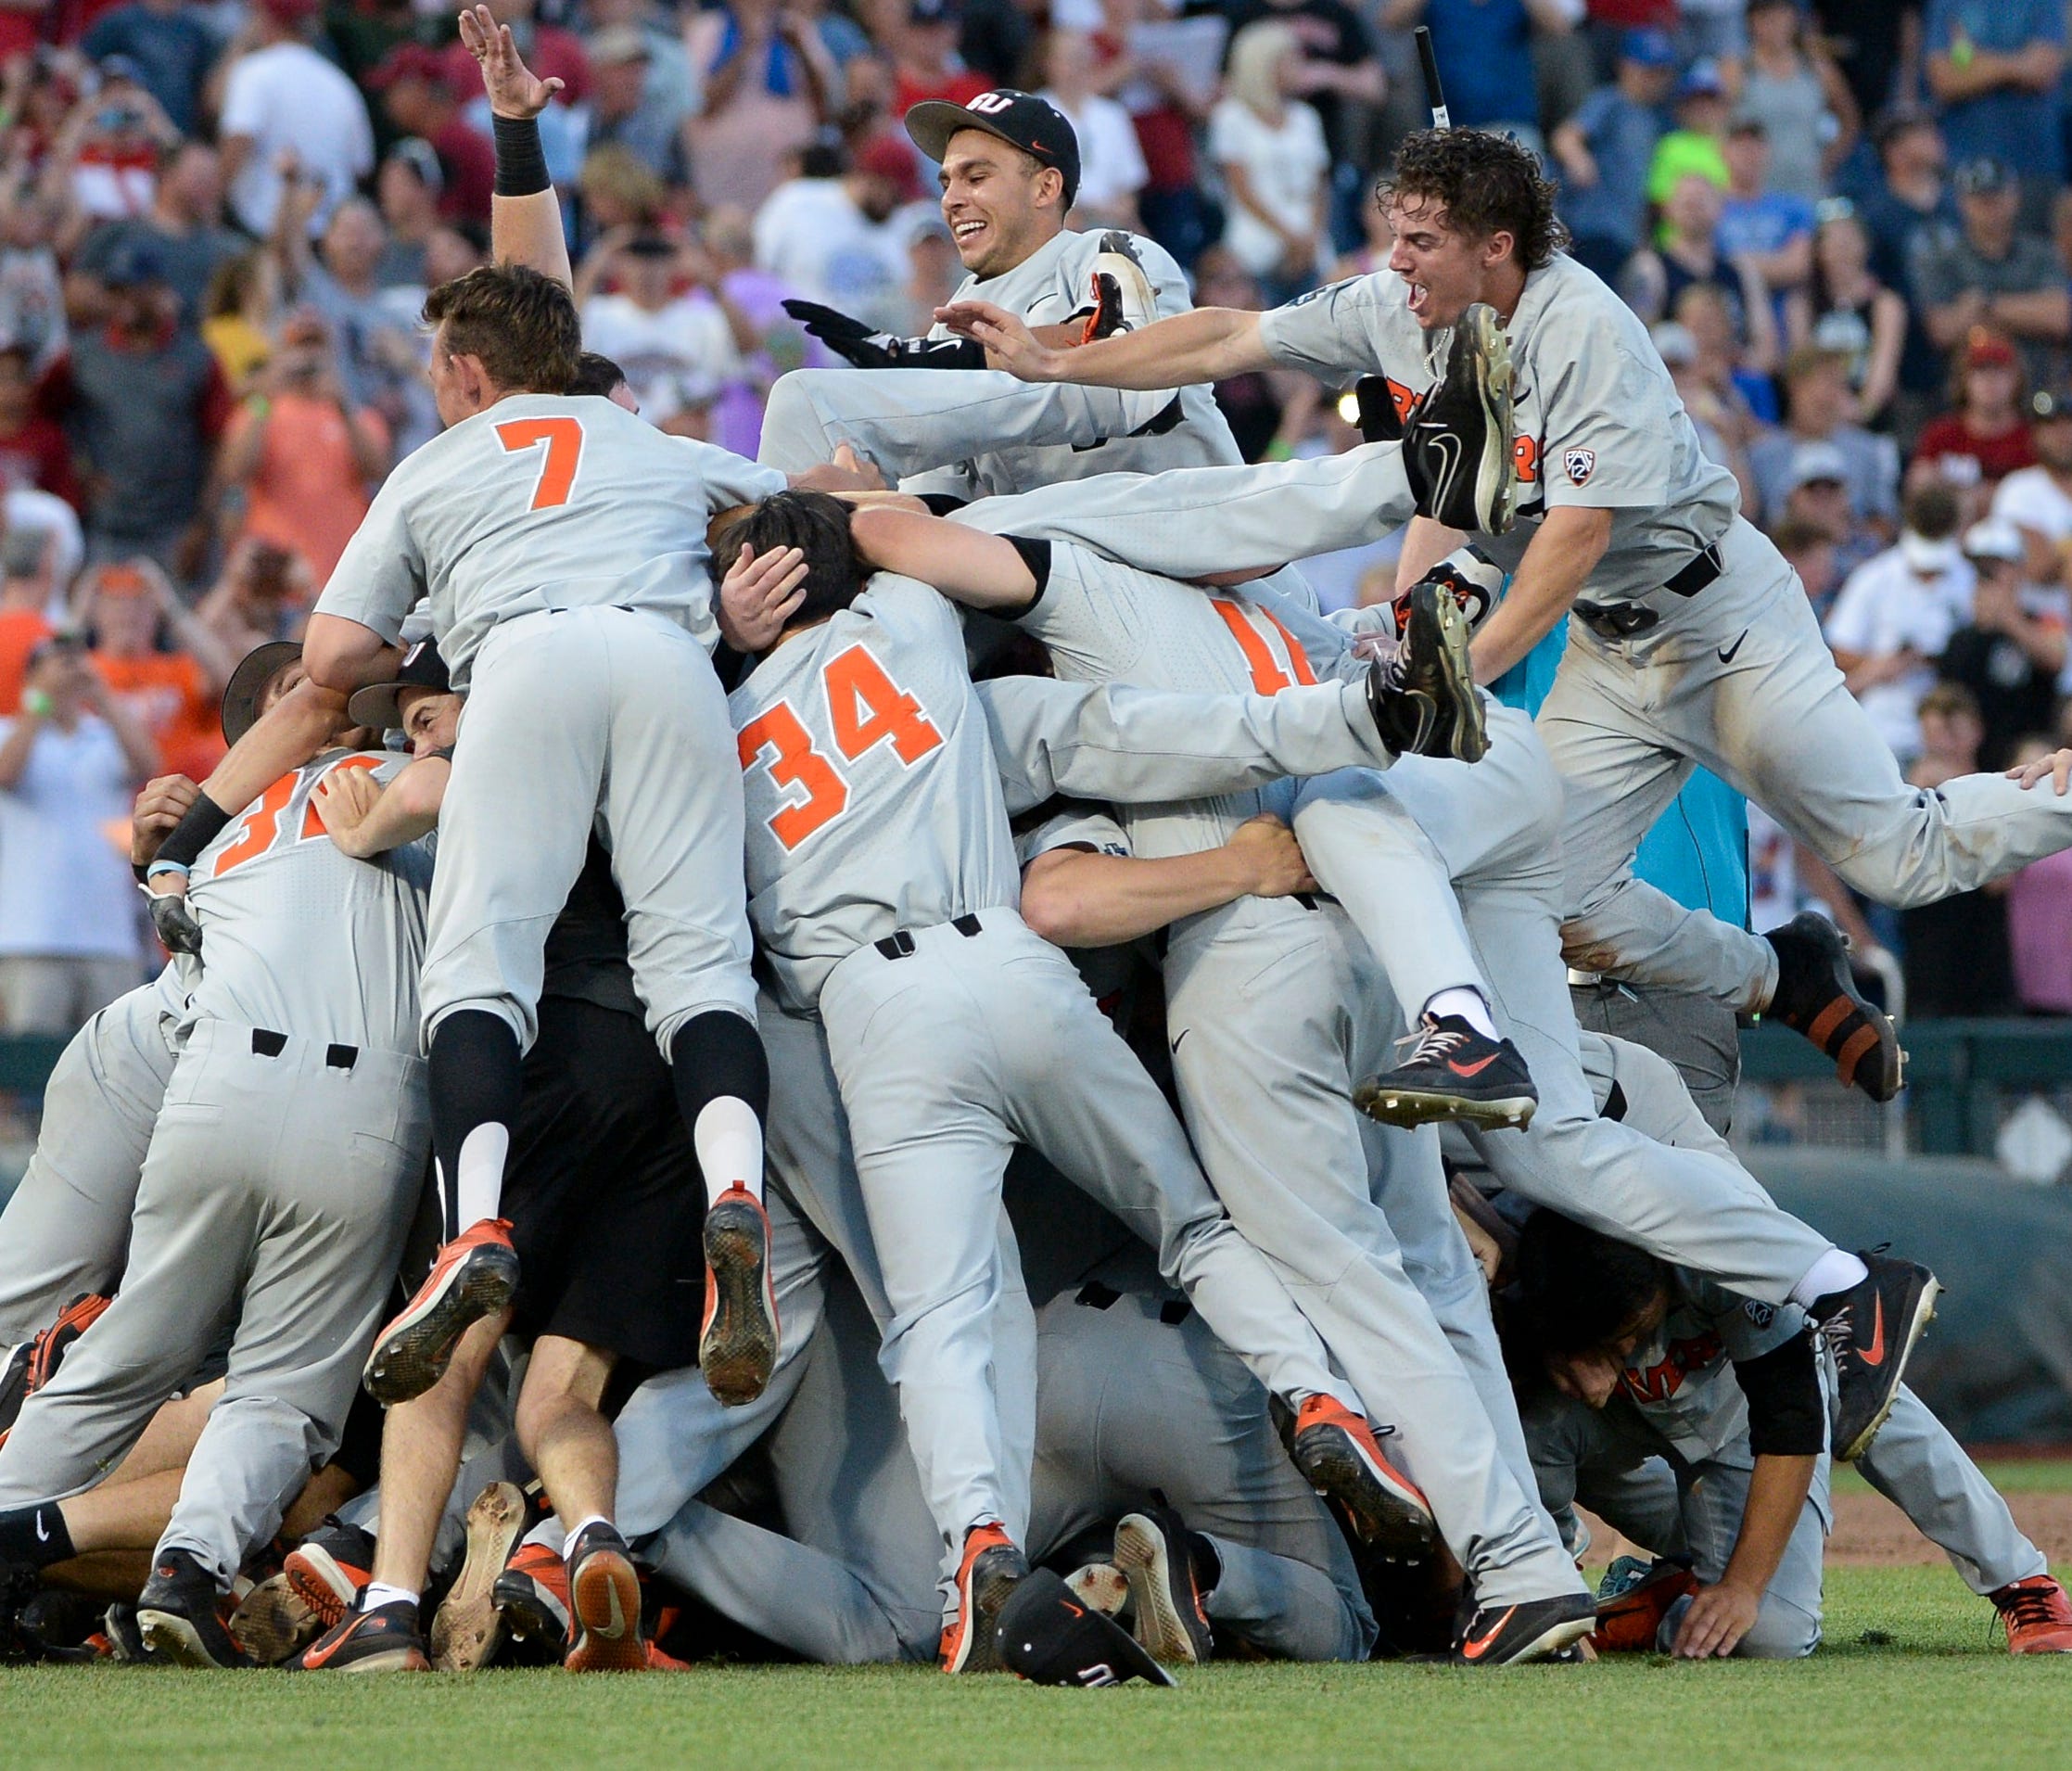 Oregon State celebrates after clinching the national title.